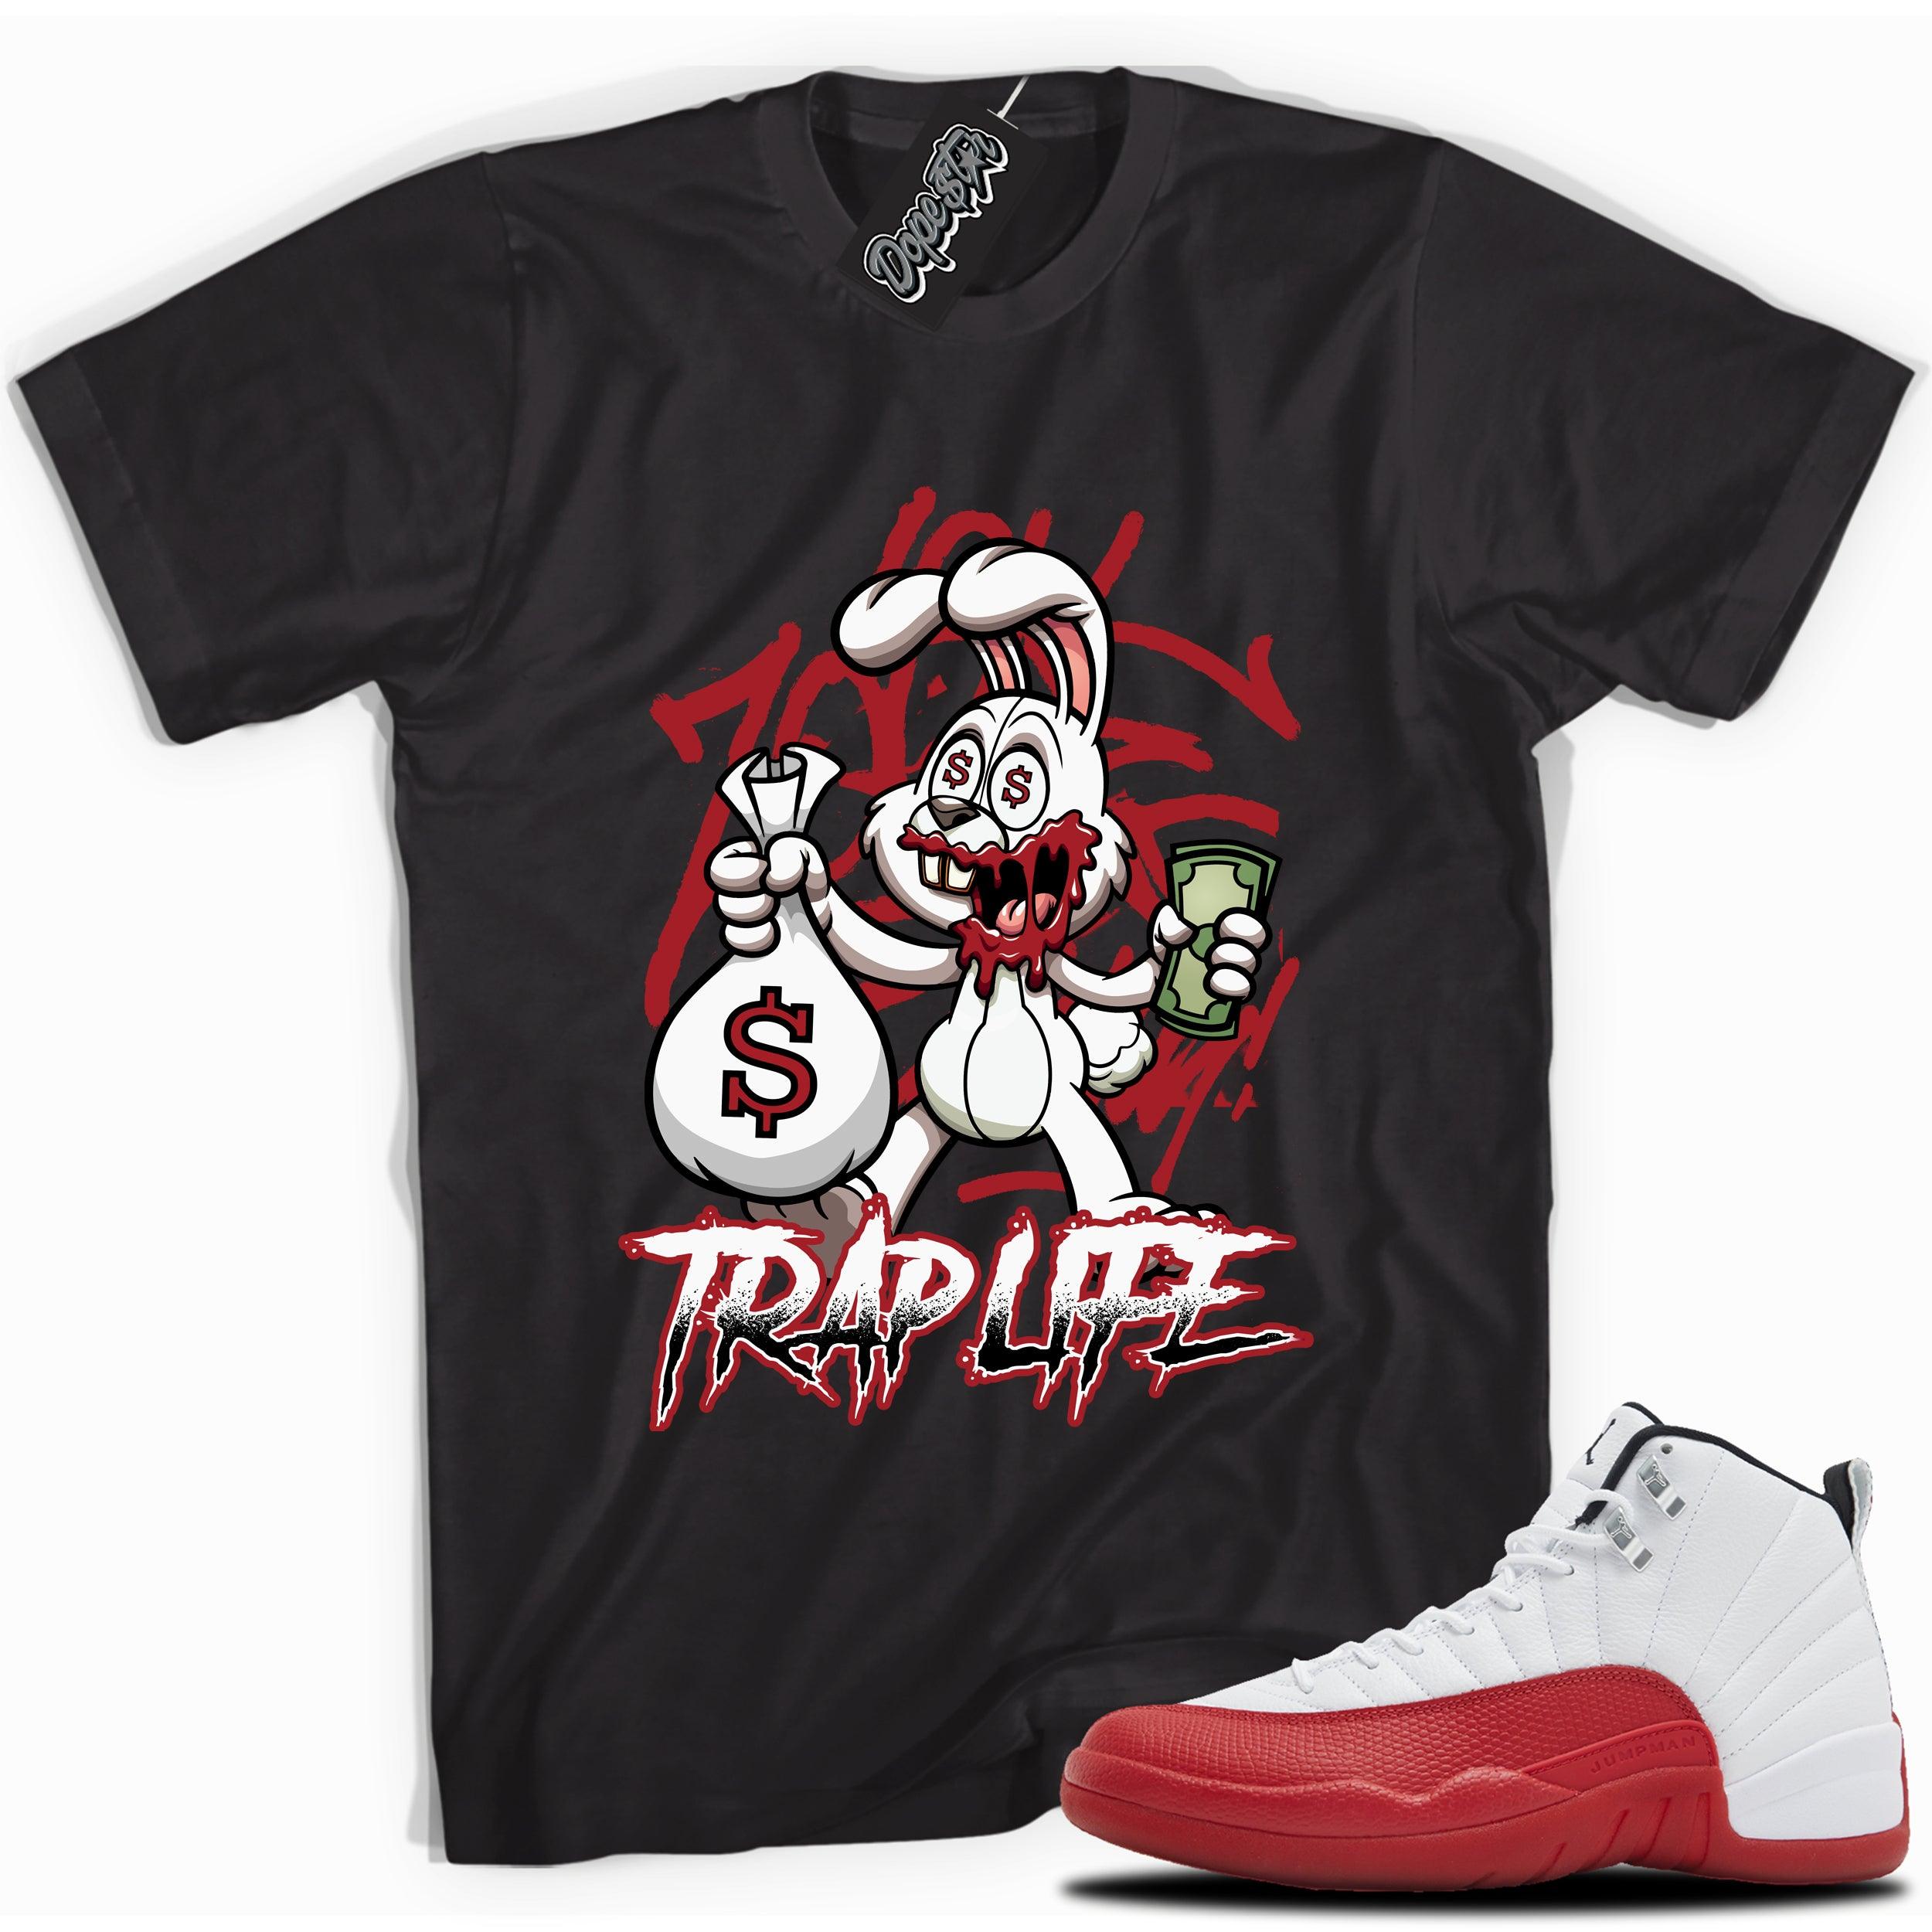 Cool Black graphic tee with “Trap Rabbit” print, that perfectly matches Air Jordan 12 Retro Cherry Red 2023 red and white sneakers 